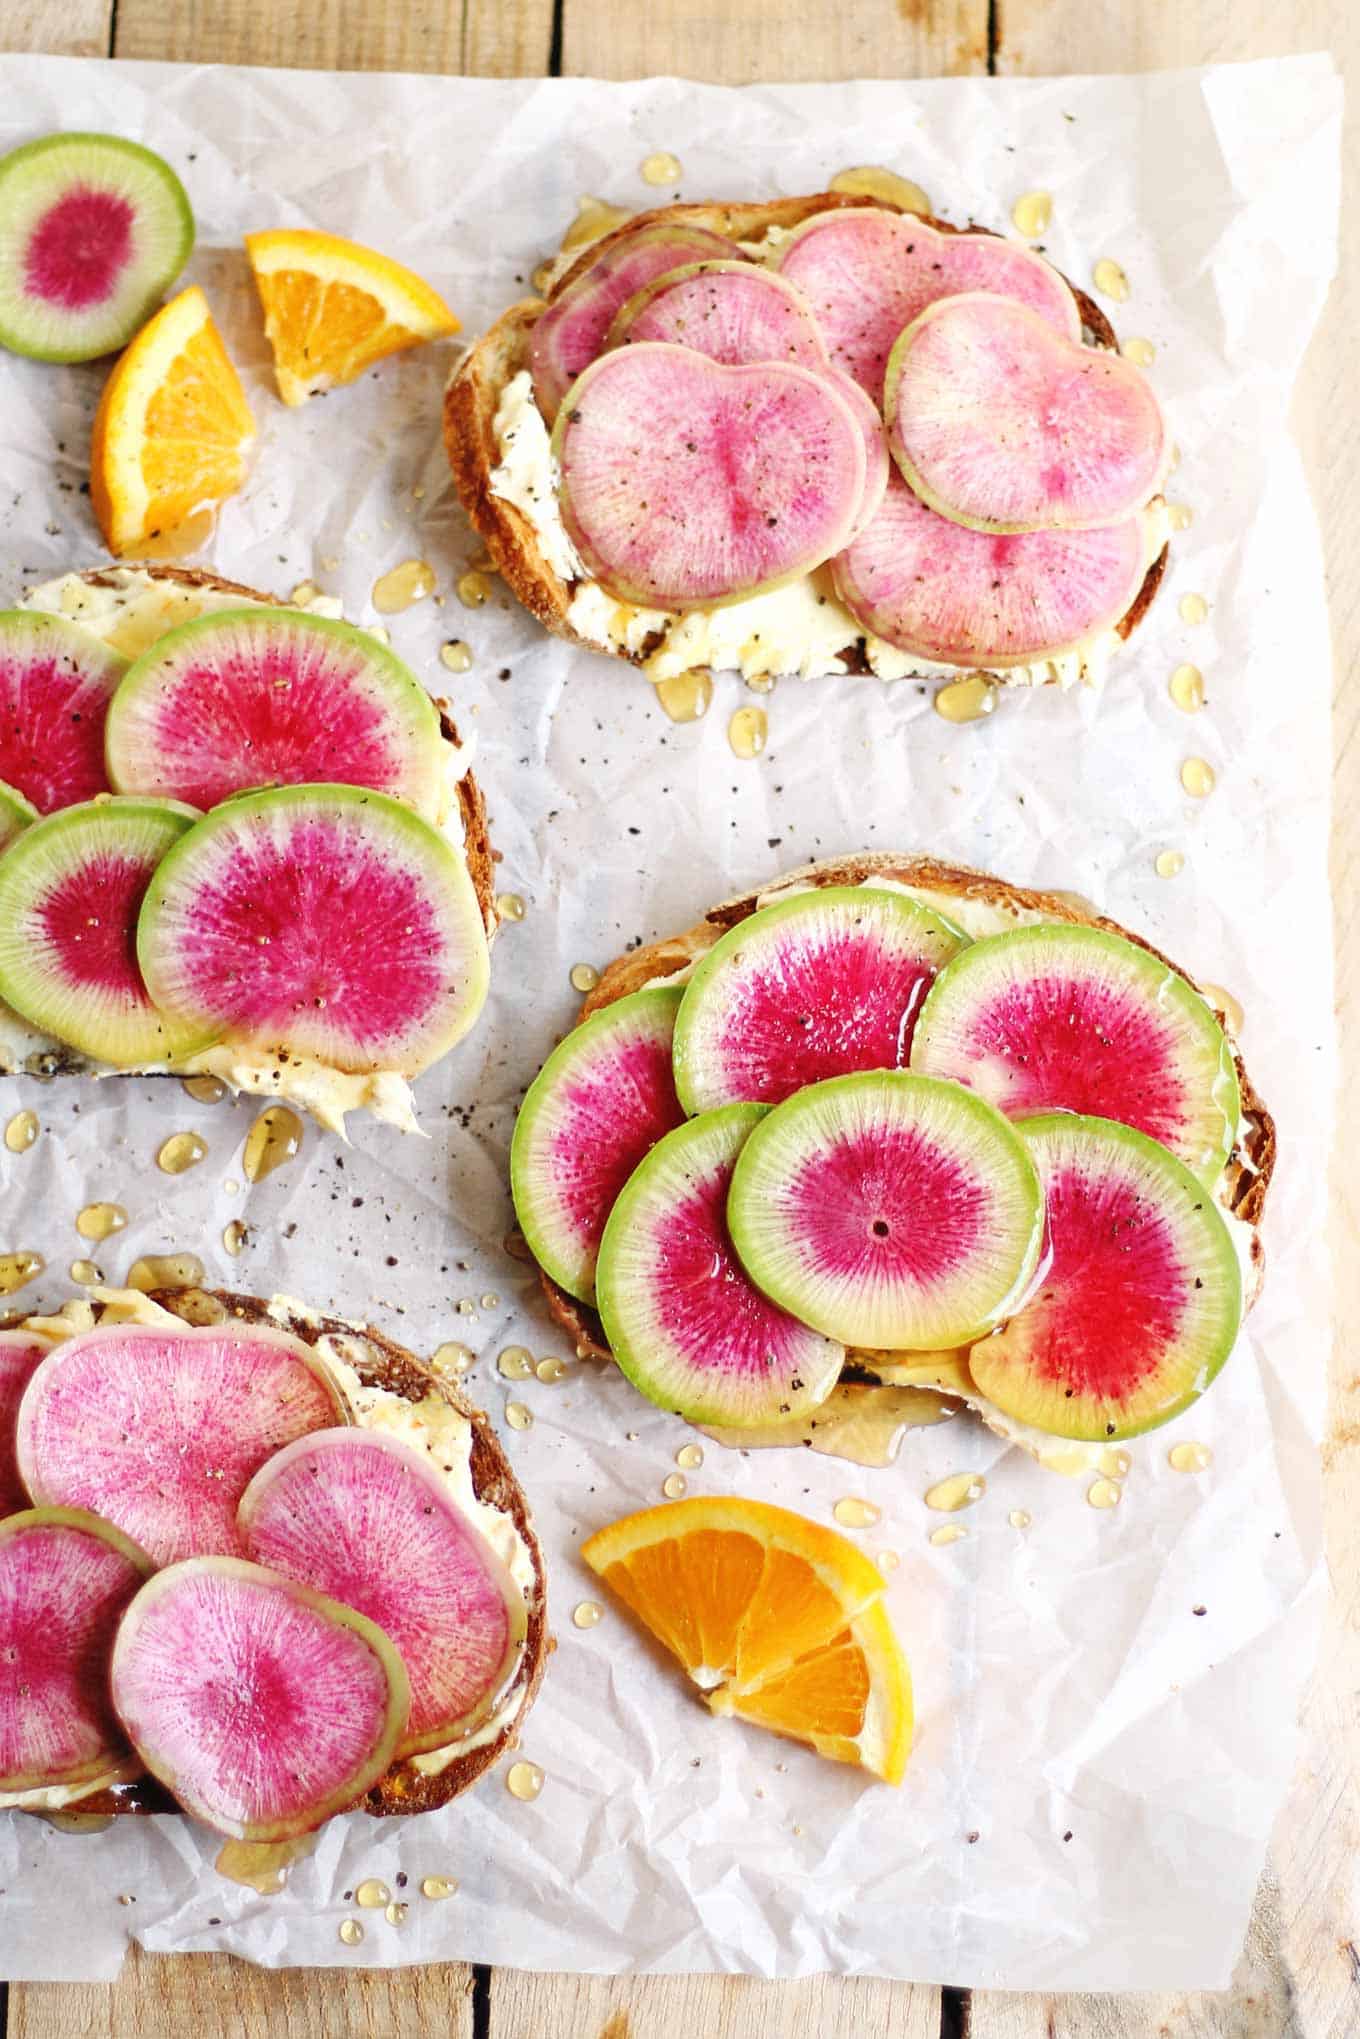 The perfect vegetarian farmers market lunch in only 10 minutes! Bright and springy watermelon radish toast with orange mascarpone and honey recipe. Peppery radishes, mascarpone whipped with orange zest, and sweet honey. // Rhubarbarians